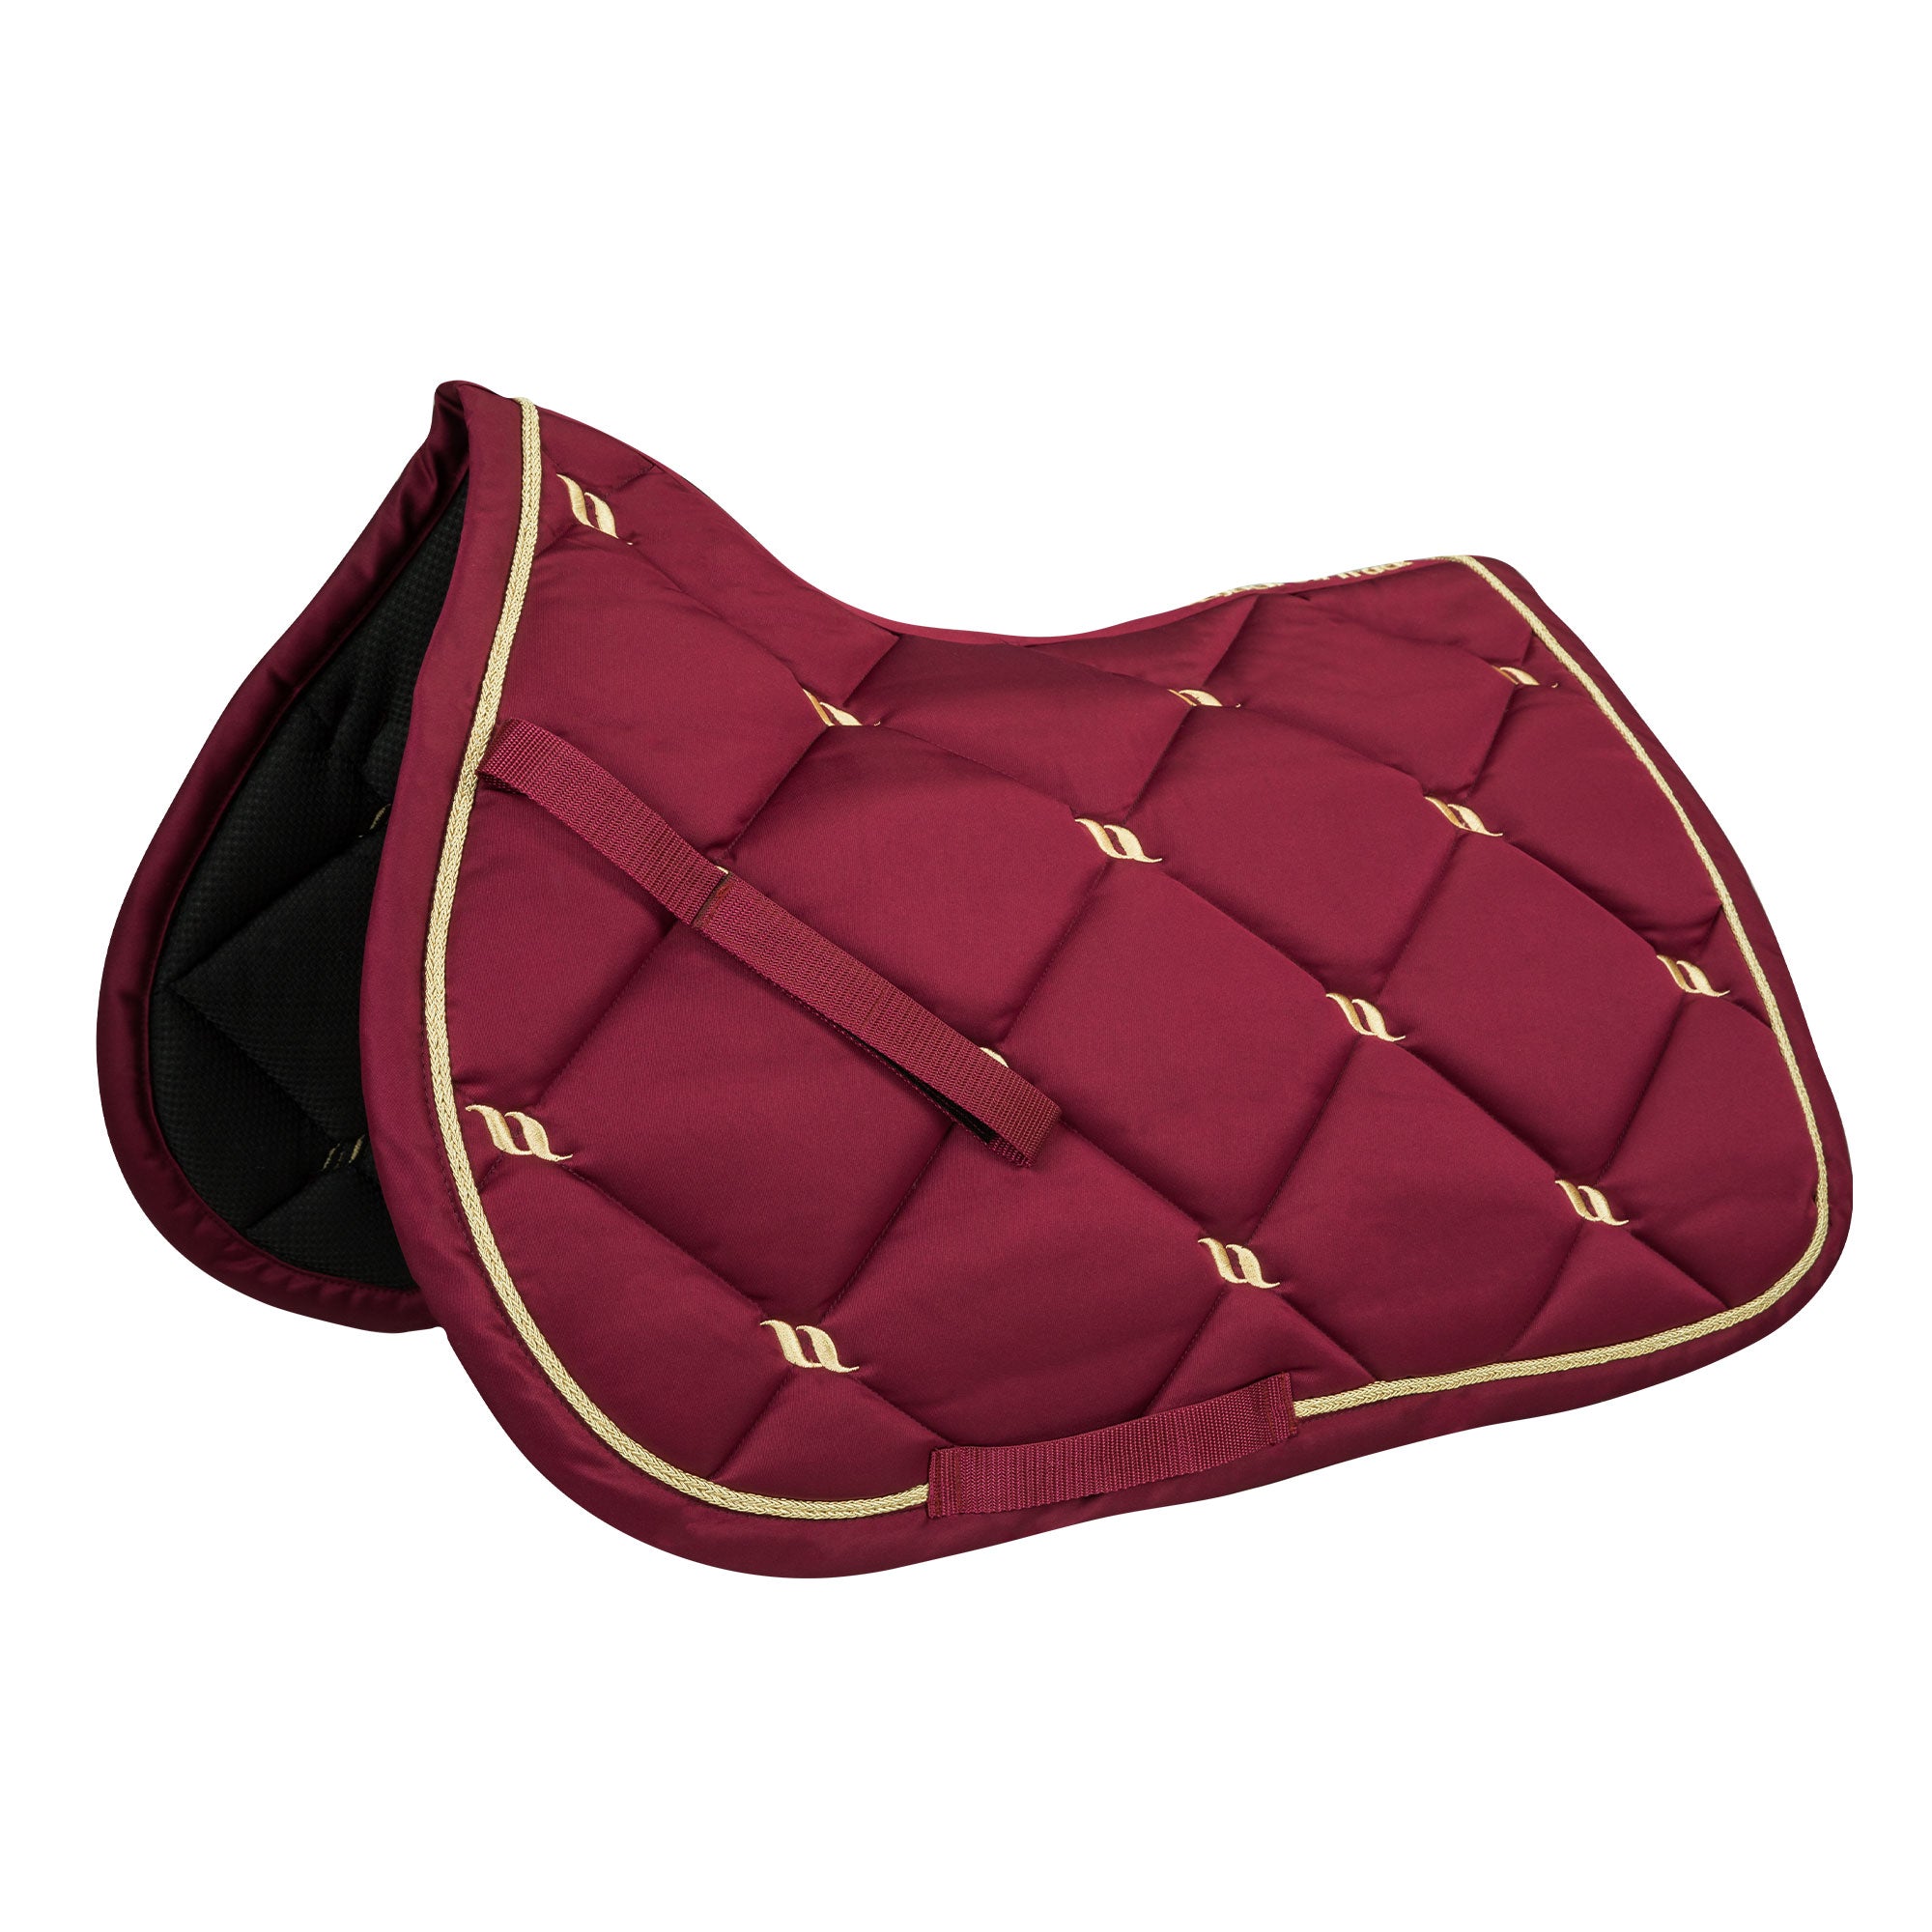 "Nights Collection" Saddle Pad Jumping Dark Red - Full